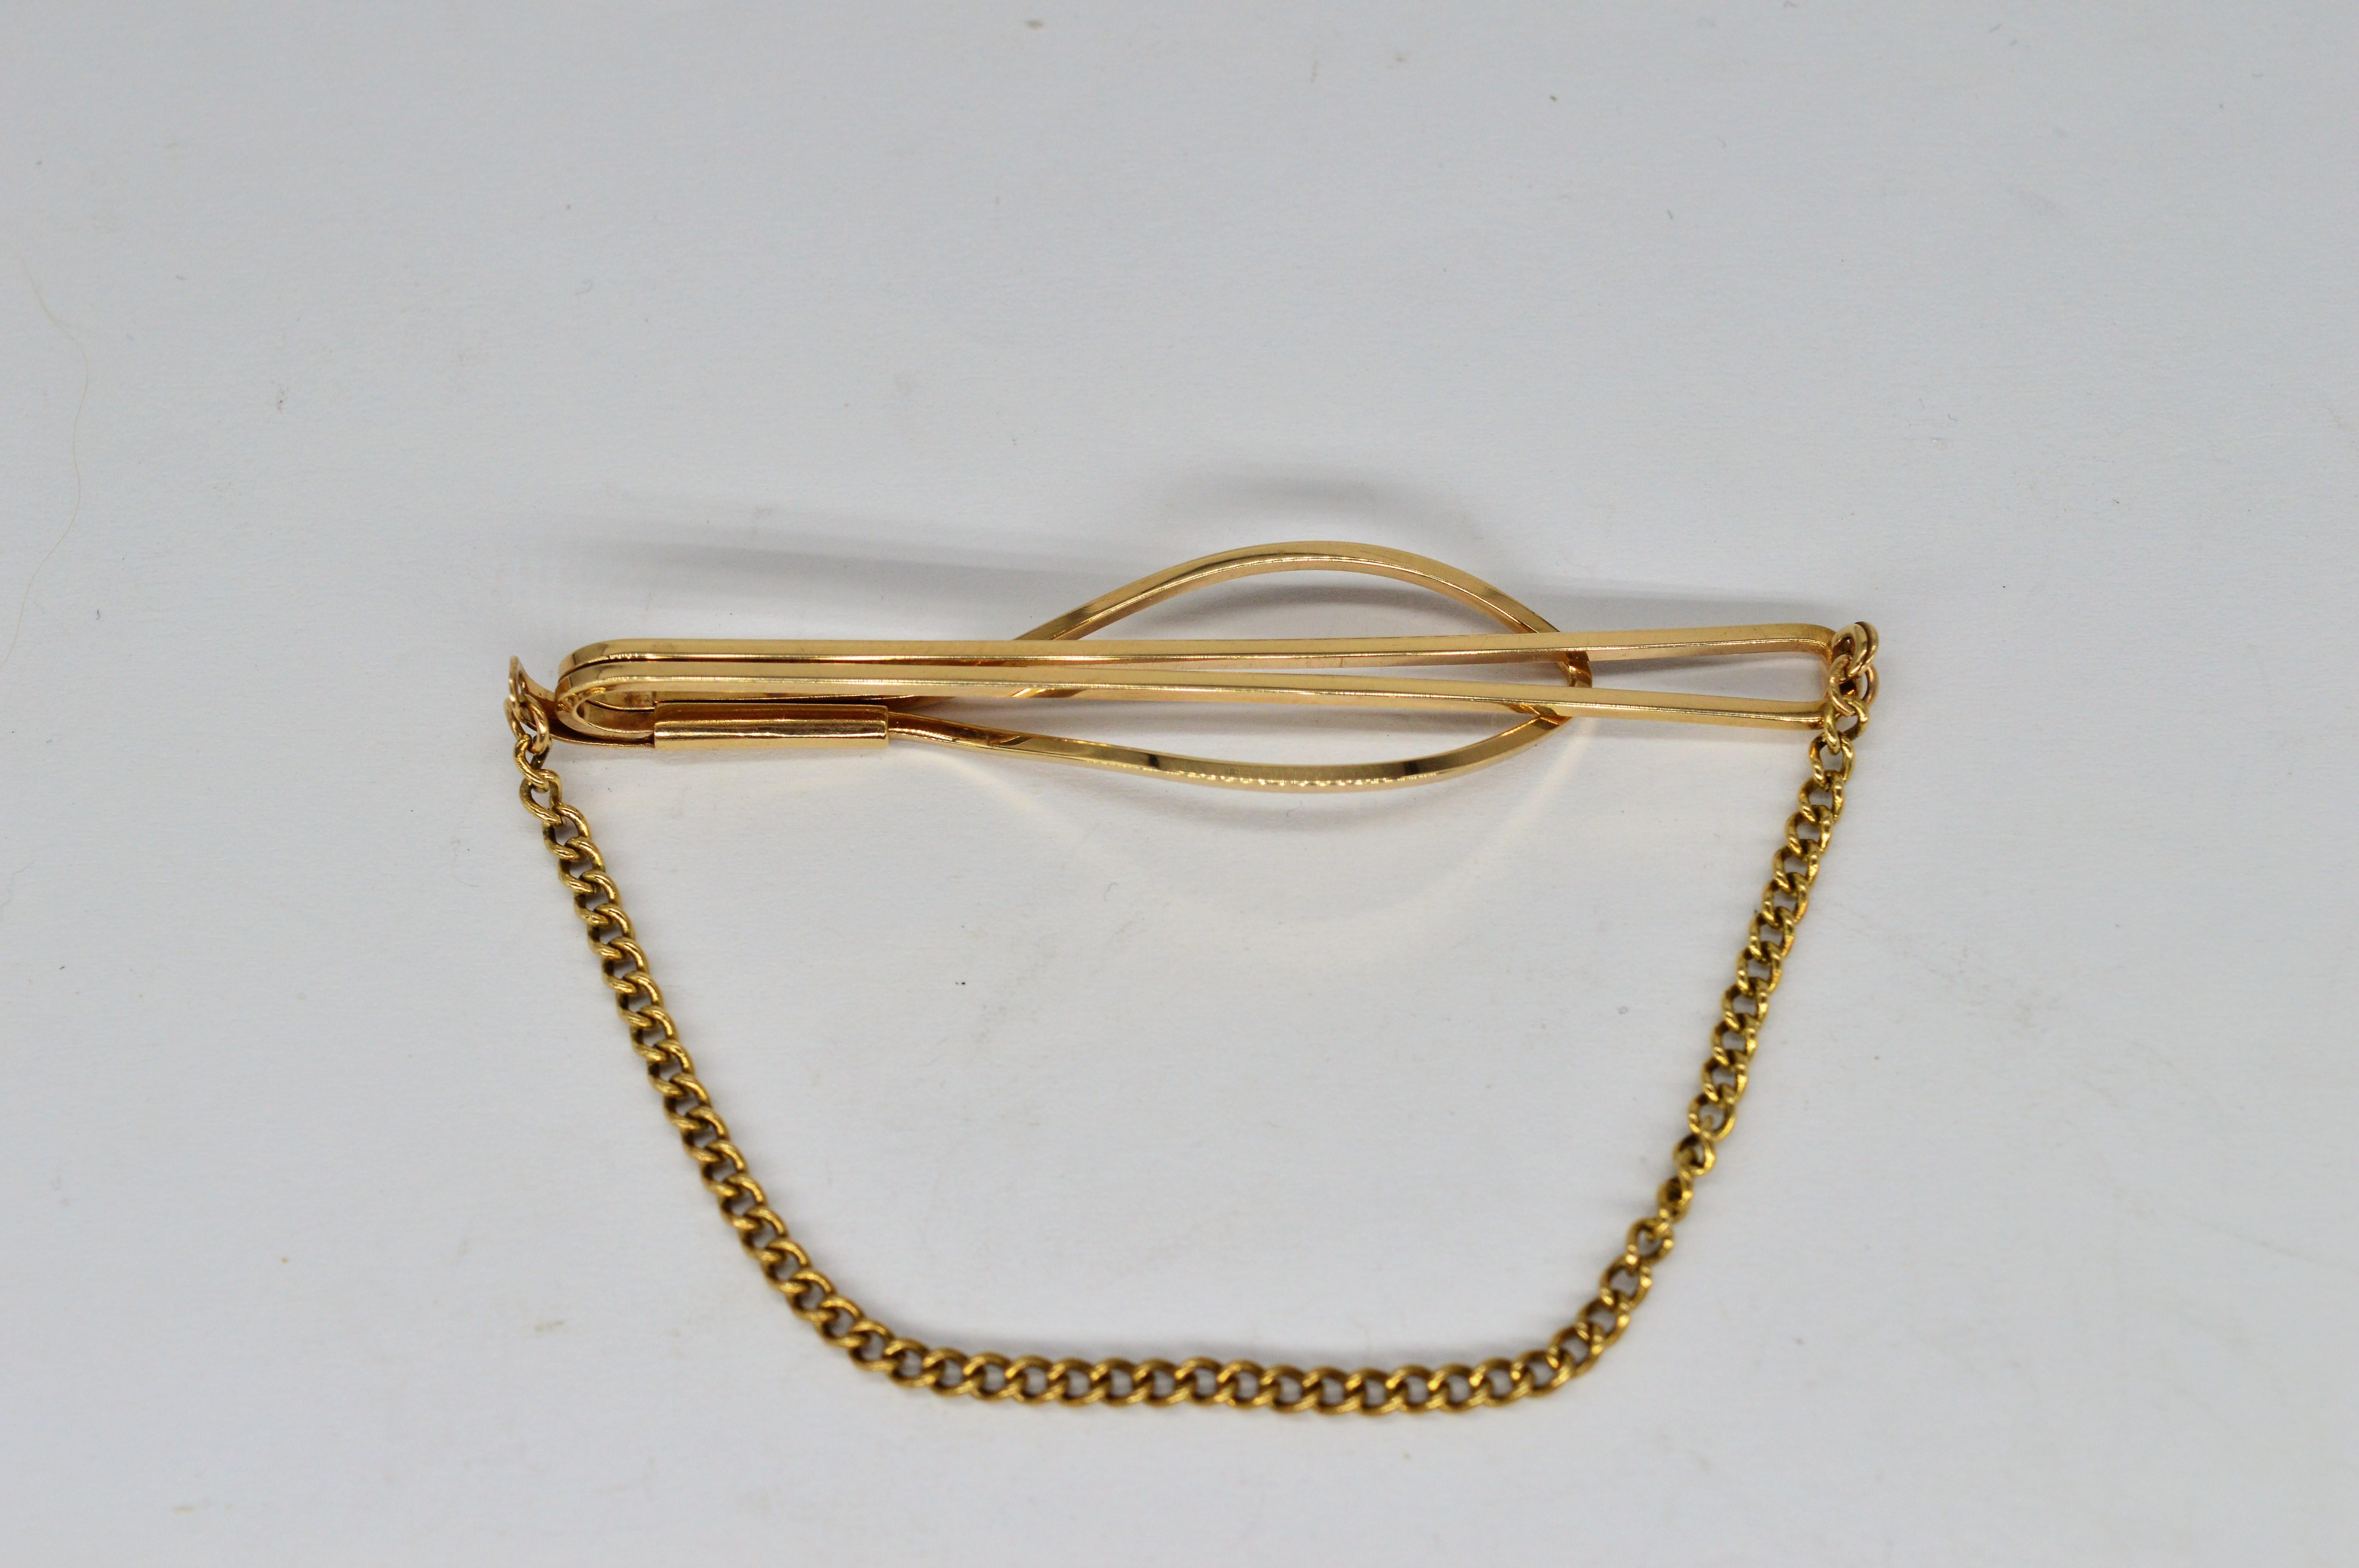 A vintage 9ct gold tie clip with a stylish chain

Classically designed with a chain to hold down your tie

5.10g

We have sold to the set of Hit shows like Peaky Blinders and Outlander as well as to Buckingham Palace so our items are truly fit for